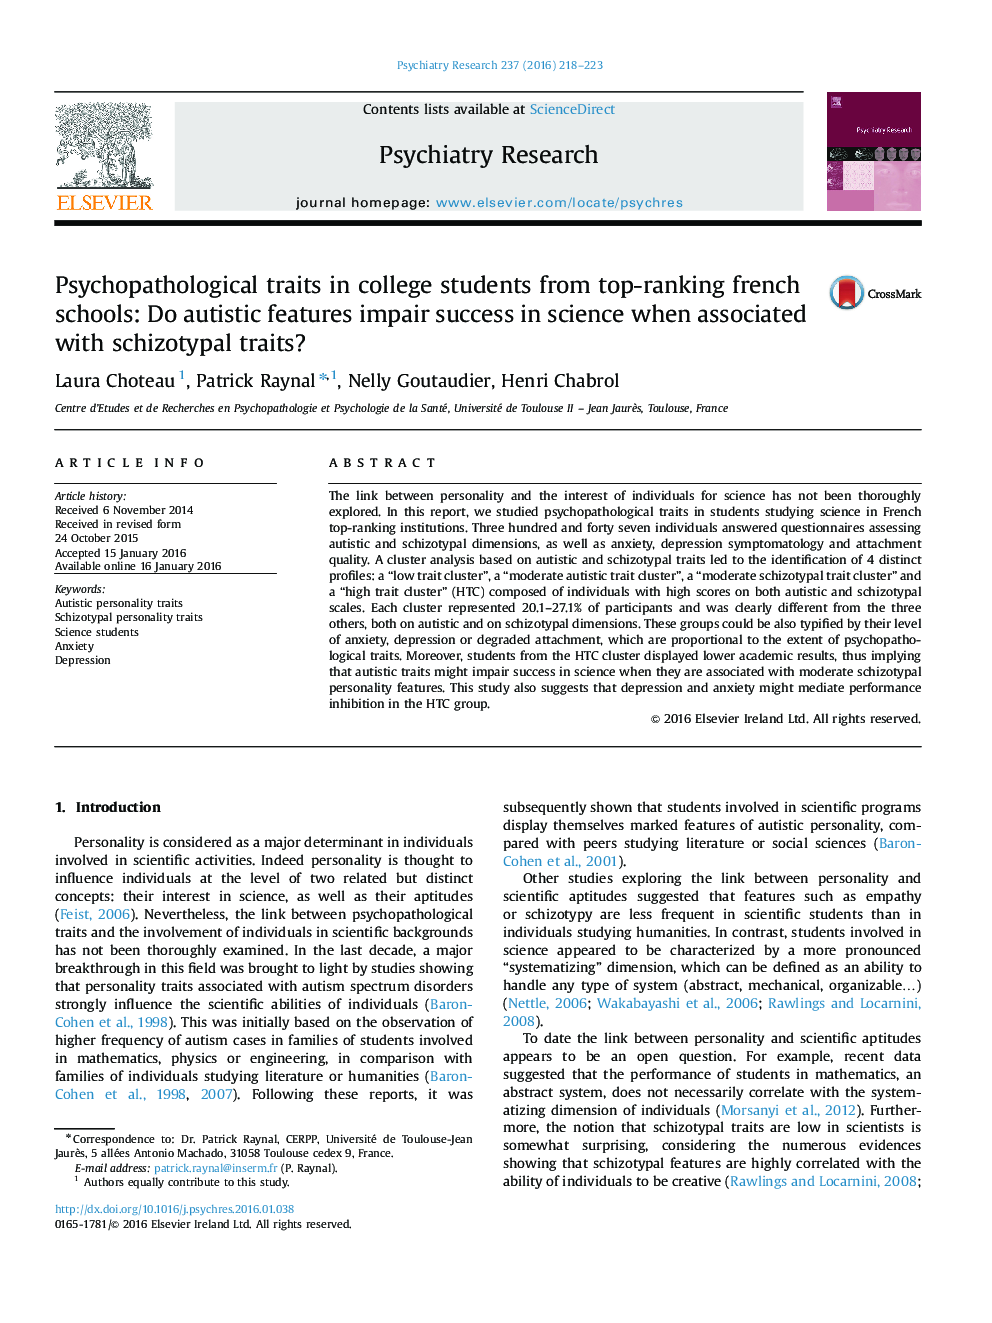 Psychopathological traits in college students from top-ranking french schools: Do autistic features impair success in science when associated with schizotypal traits?